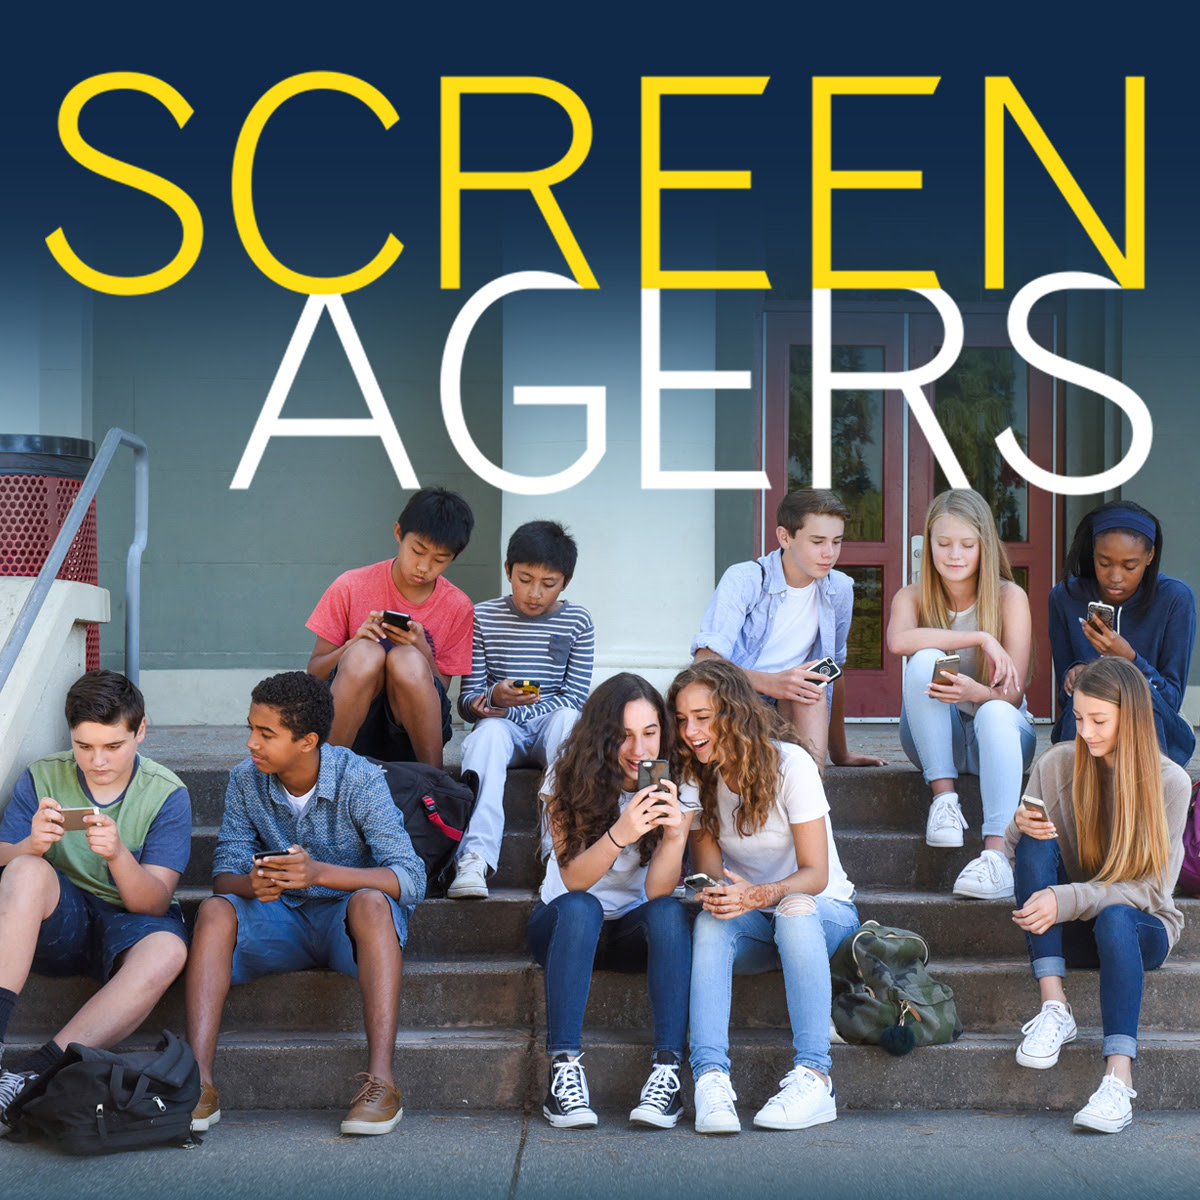 Screenagers Film Presented By Parma Learning Center Parma School District